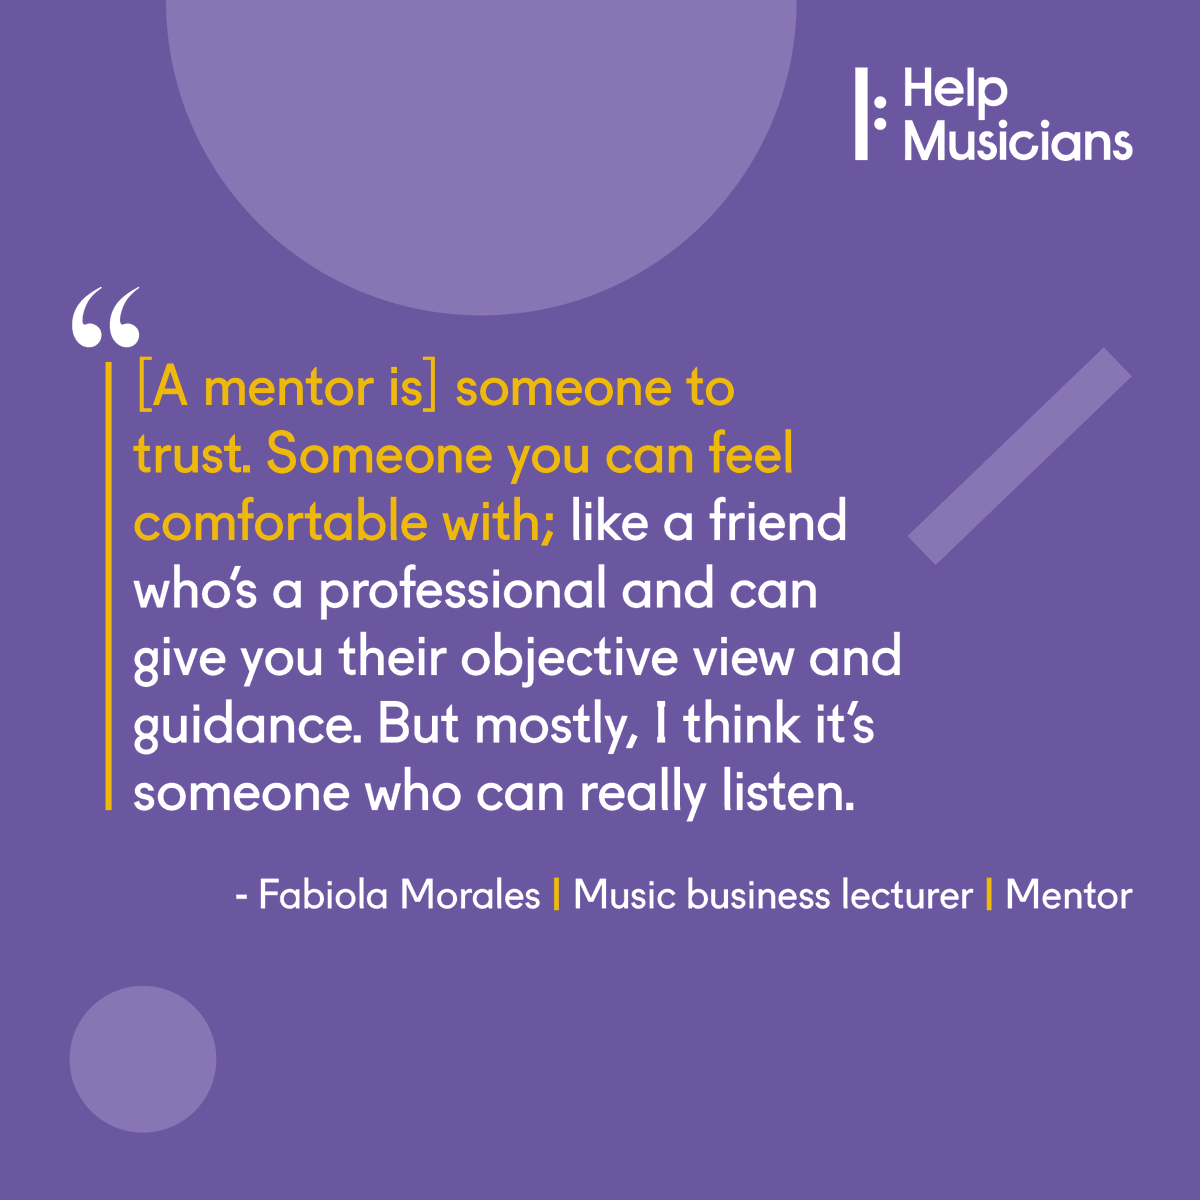 Mentoring is incredibly rewarding. Witnessing the growth and success of your mentee brings a profound sense of fulfilment. If you've worked in music, you could become a mentor with us to offer guidance to an emerging musician. More here: ow.ly/U0sj50ReOUg